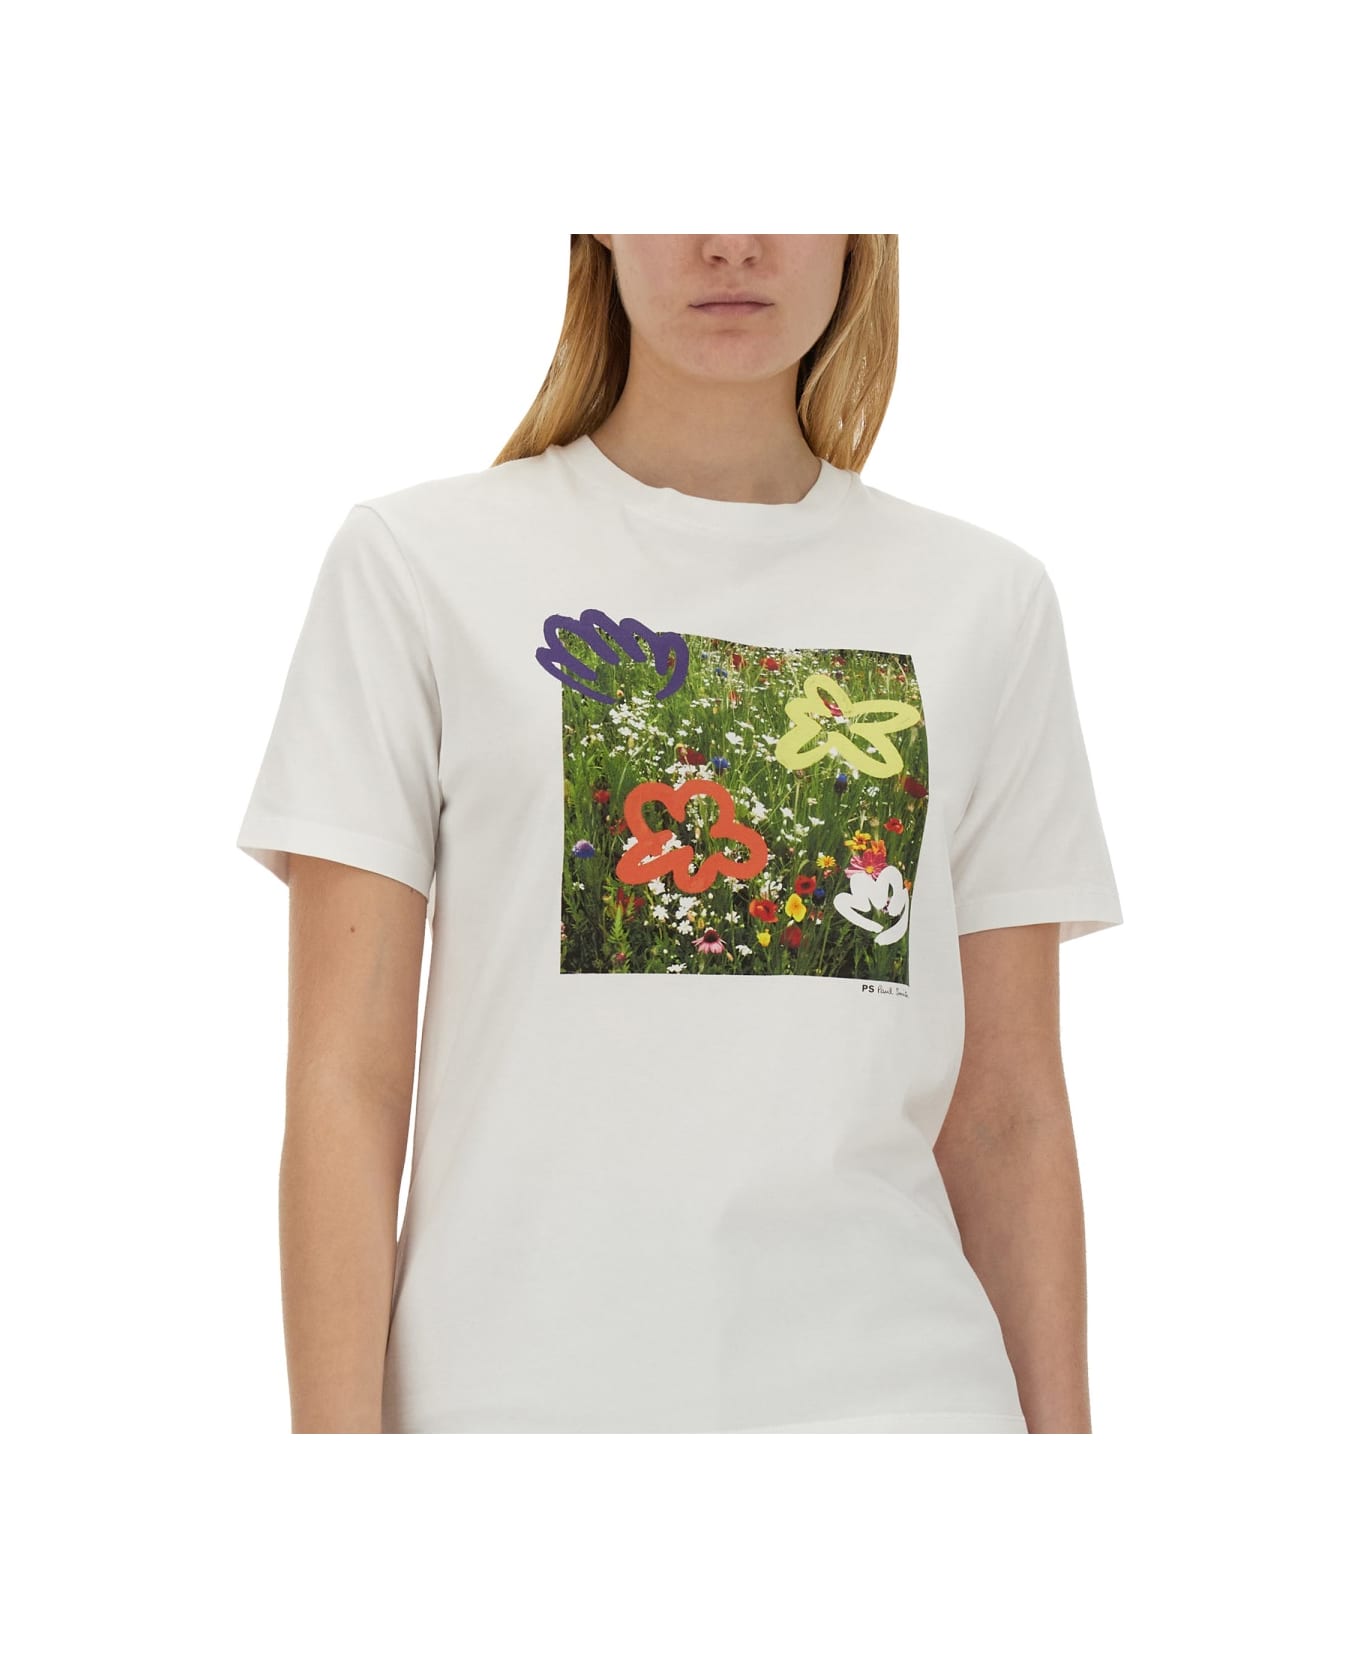 PS by Paul Smith 'wildflowers' T-shirt - WHITE